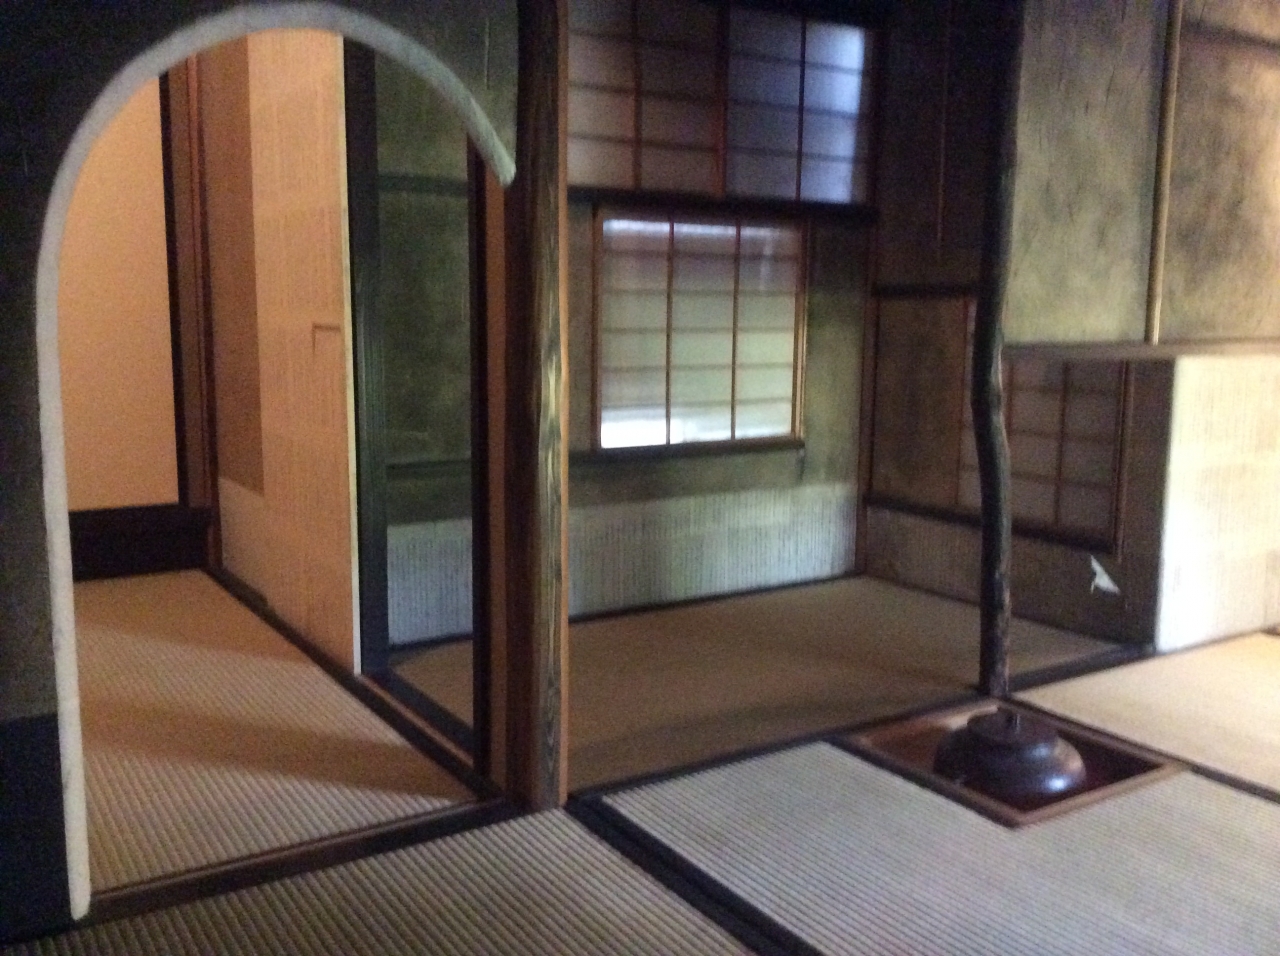 Places for Tea Ceremony